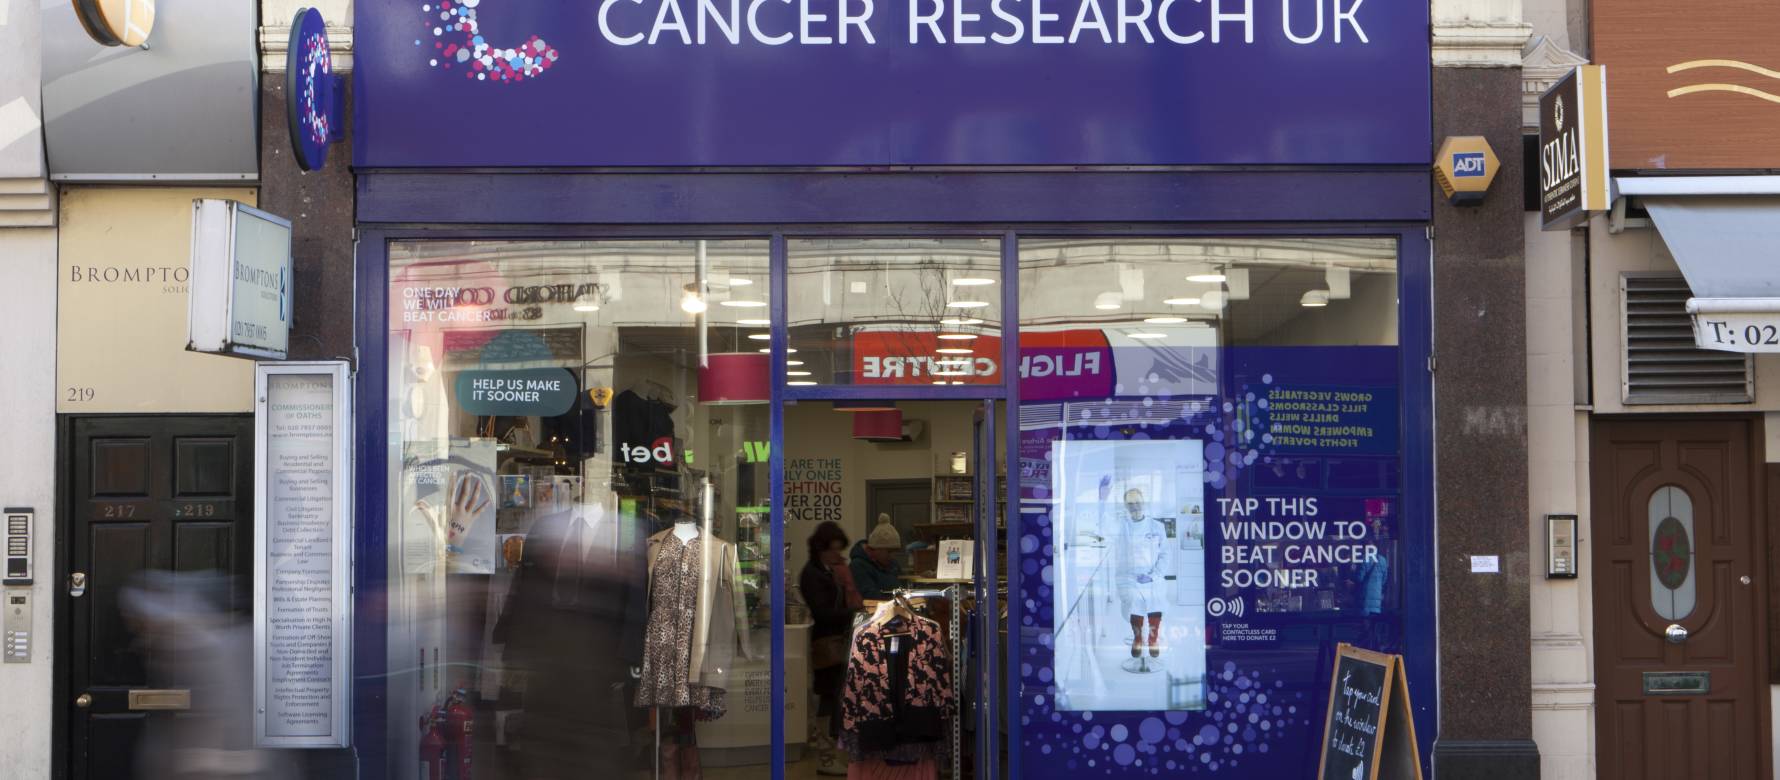 An image of a cancer research shop.